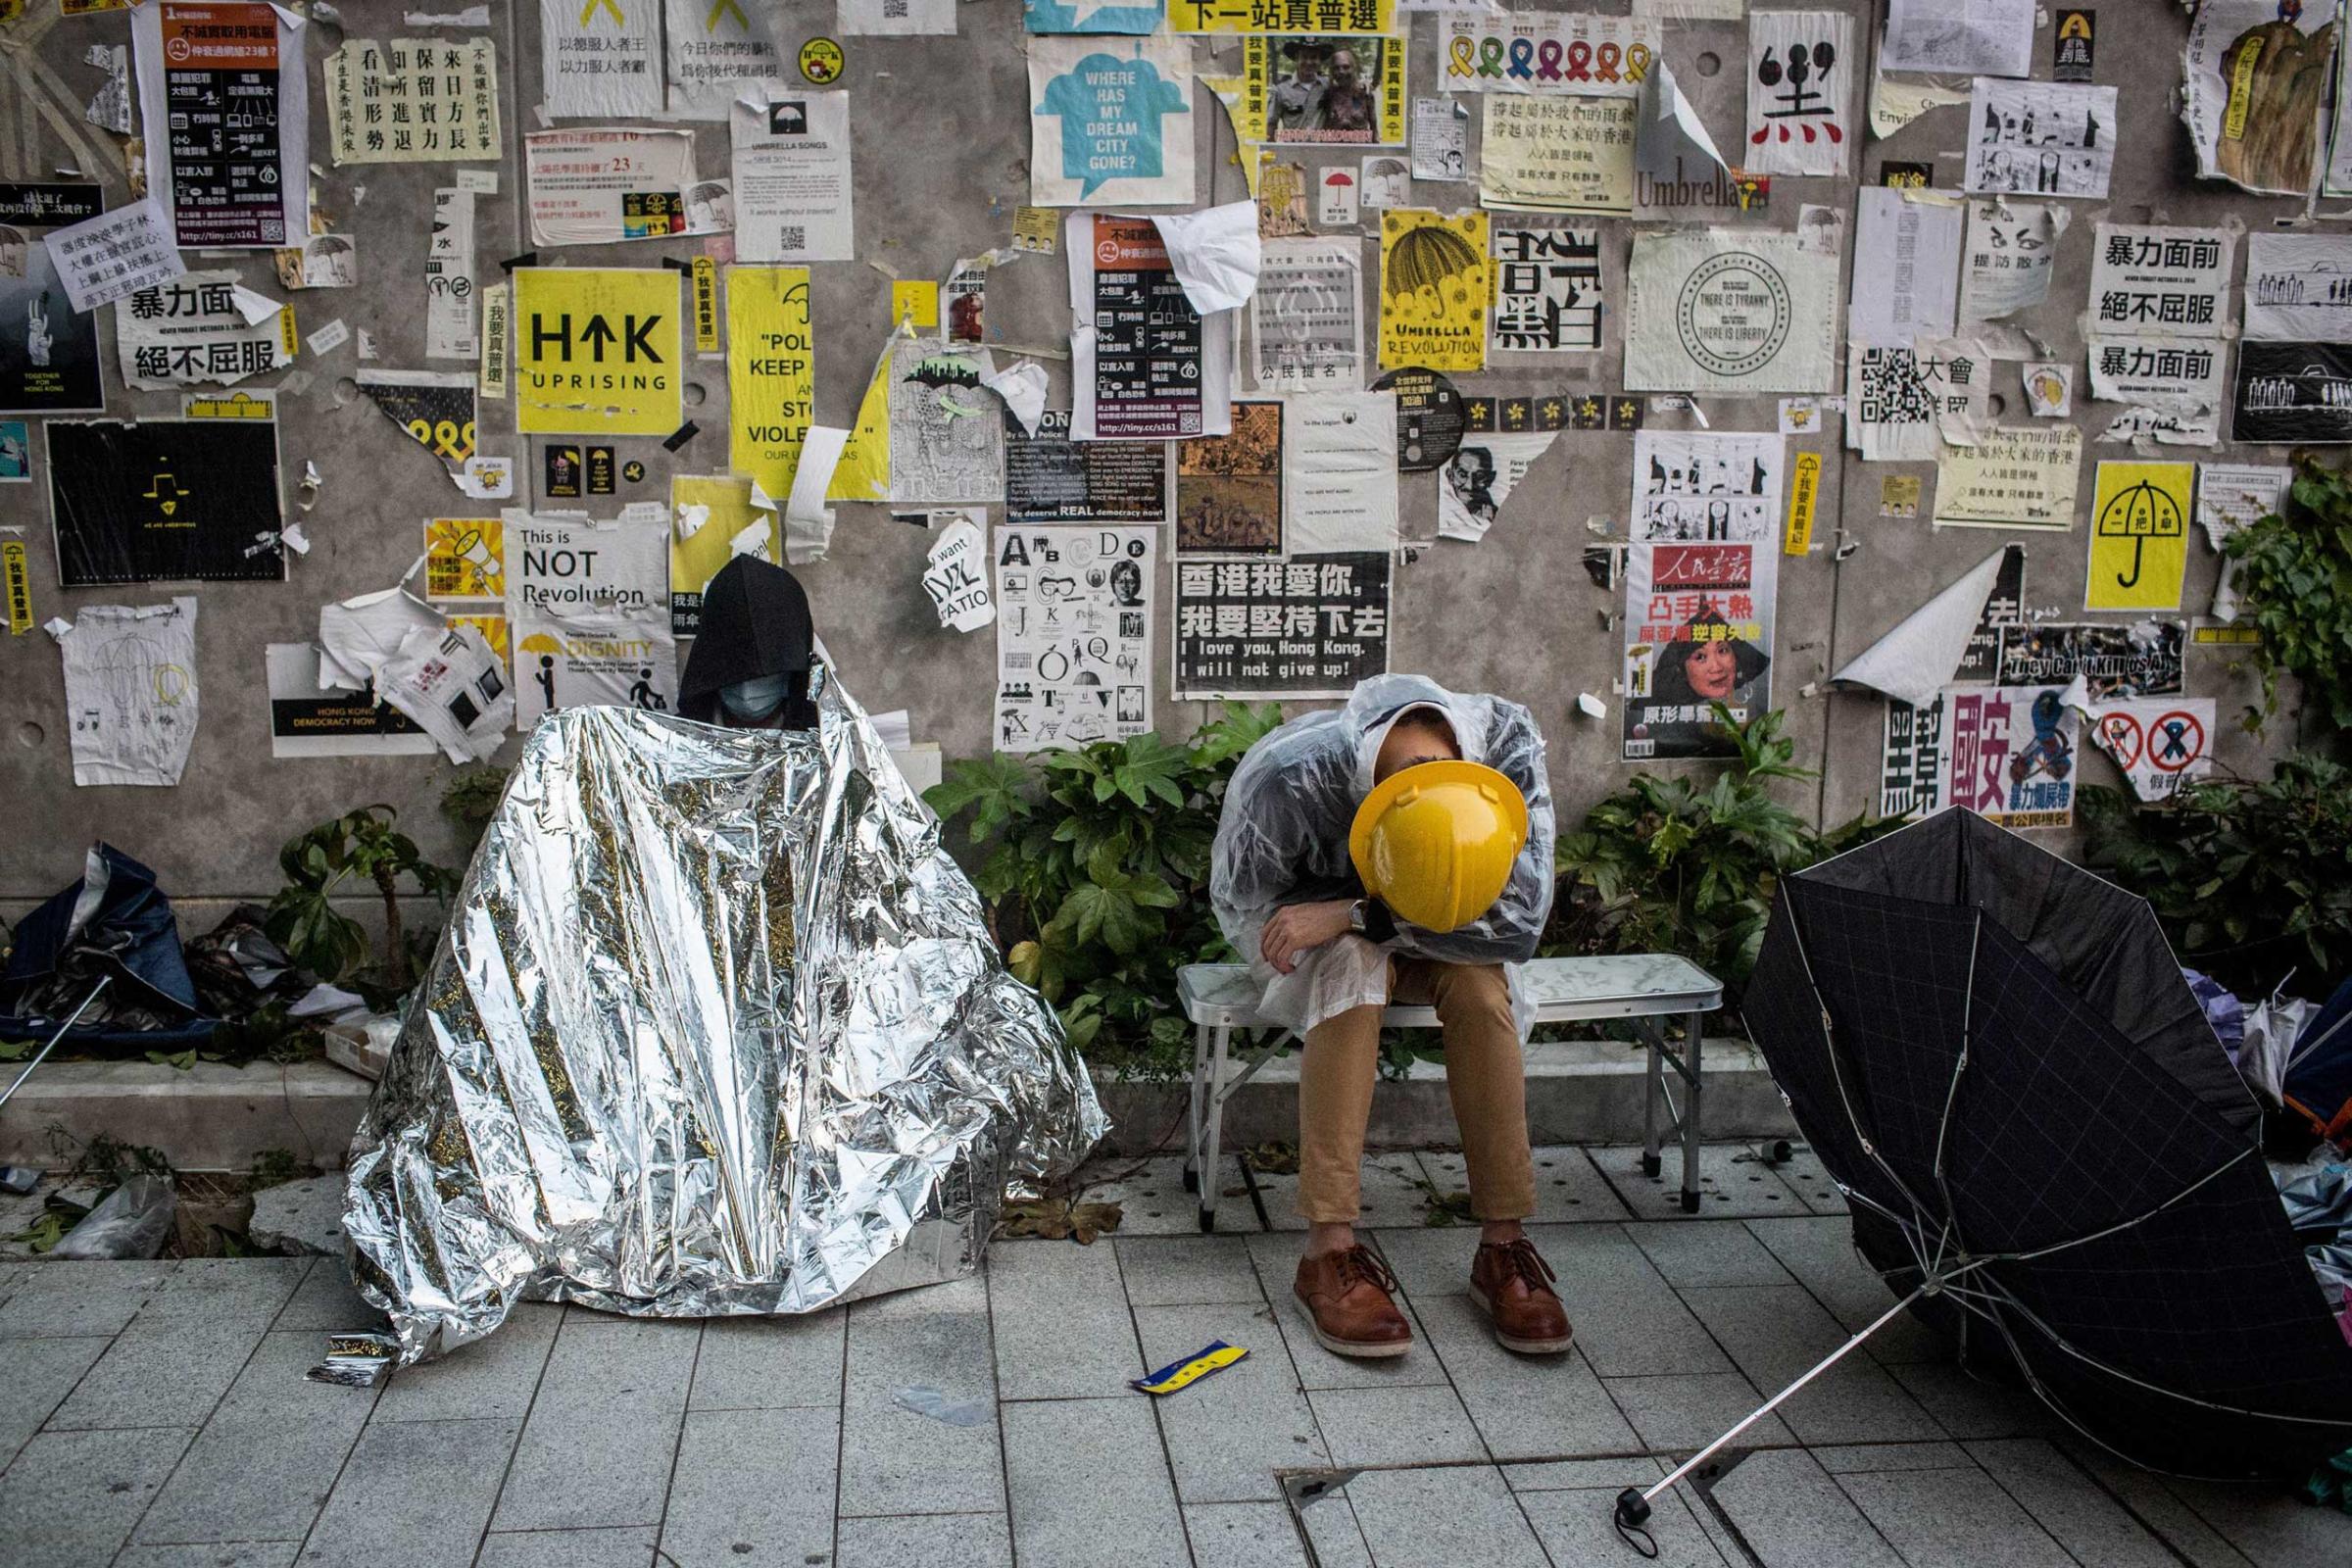 Pro-democracy activists sleep outside the Legislative Council building after protesters clashed with police on Nov. 19, 2014 in Hong Kong.